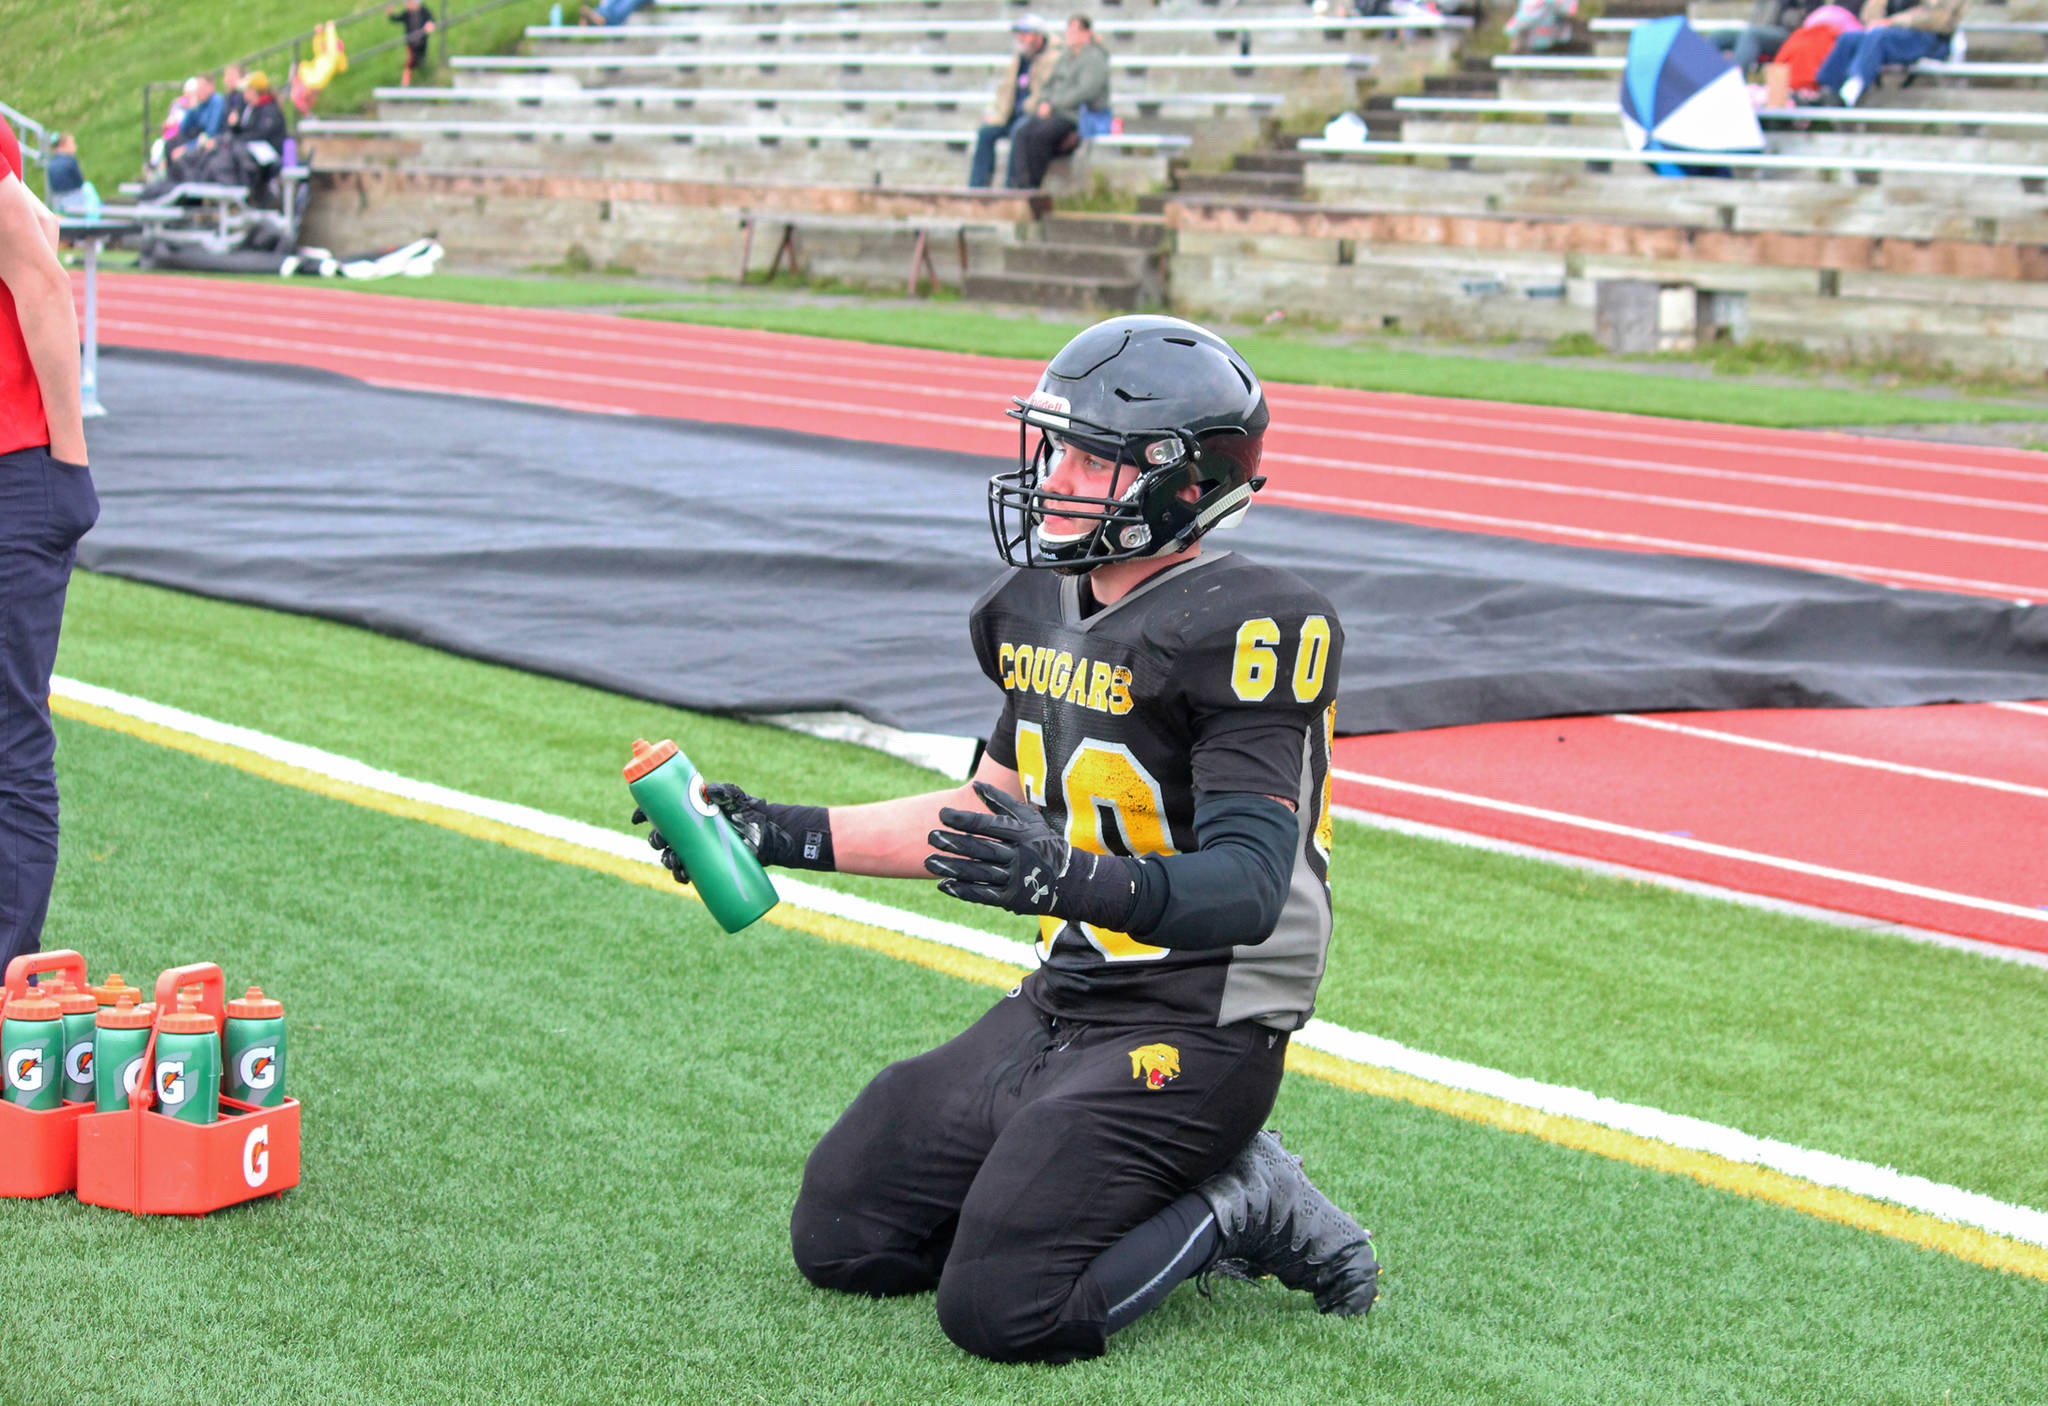 Senior offensive lineman and linebacker David Sanarov raises his hands in frustration watching his team from the sideline while taking a rest during the Cougar football game against Nikiski High School on Saturday, Sept. 2, 2017 in Homer, Alaska. The Cougars were defeated 18-40 in their second game of the season. (Photo by Megan Pacer/Homer News)